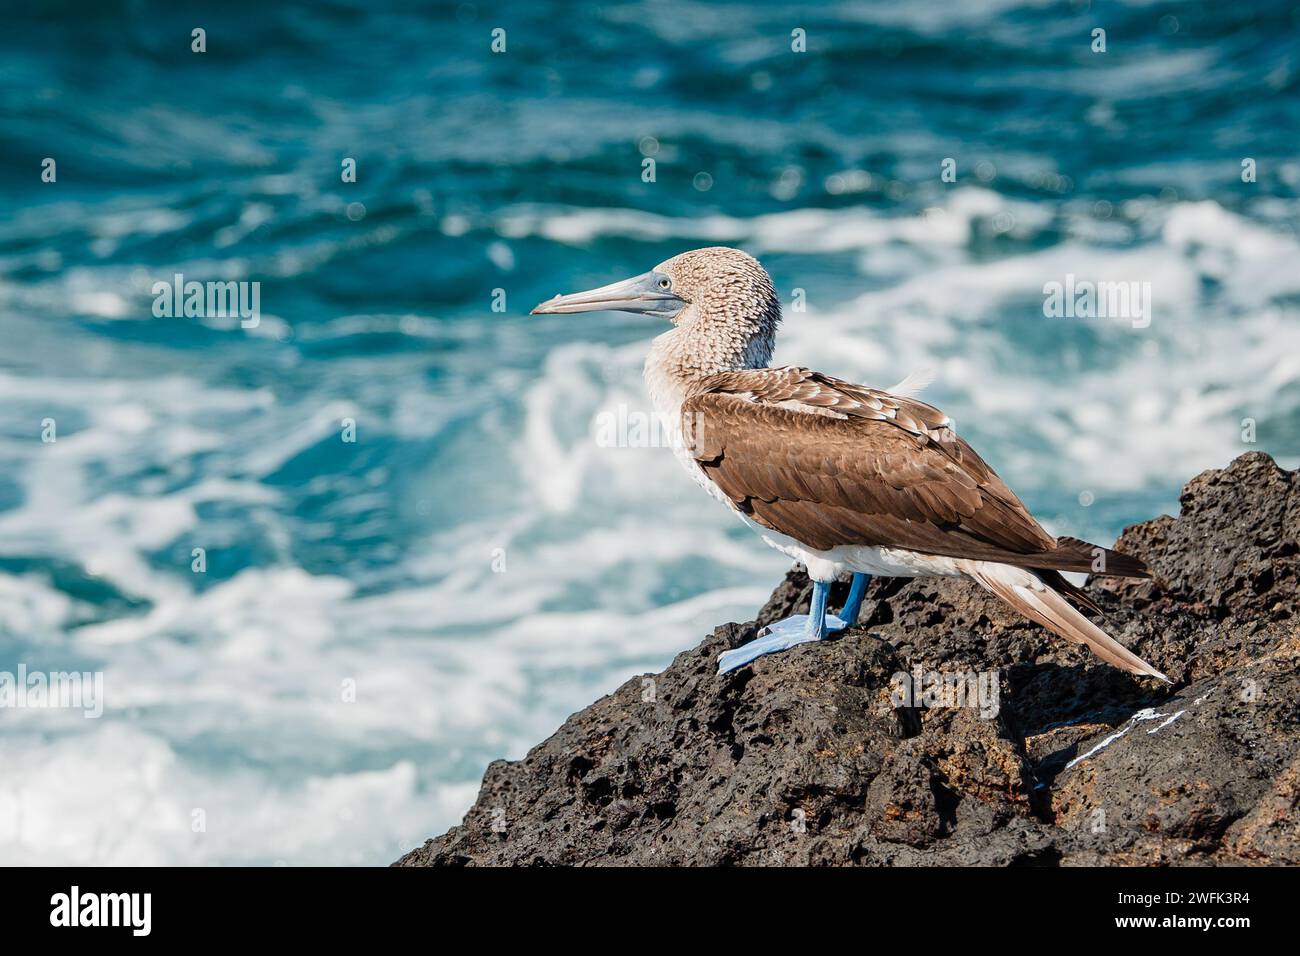 A striking Blue-footed Booby perched on a rock, with the vast blue ocean and rolling waves as a backdrop. Snapshot of coastal wildlife. Stock Photo